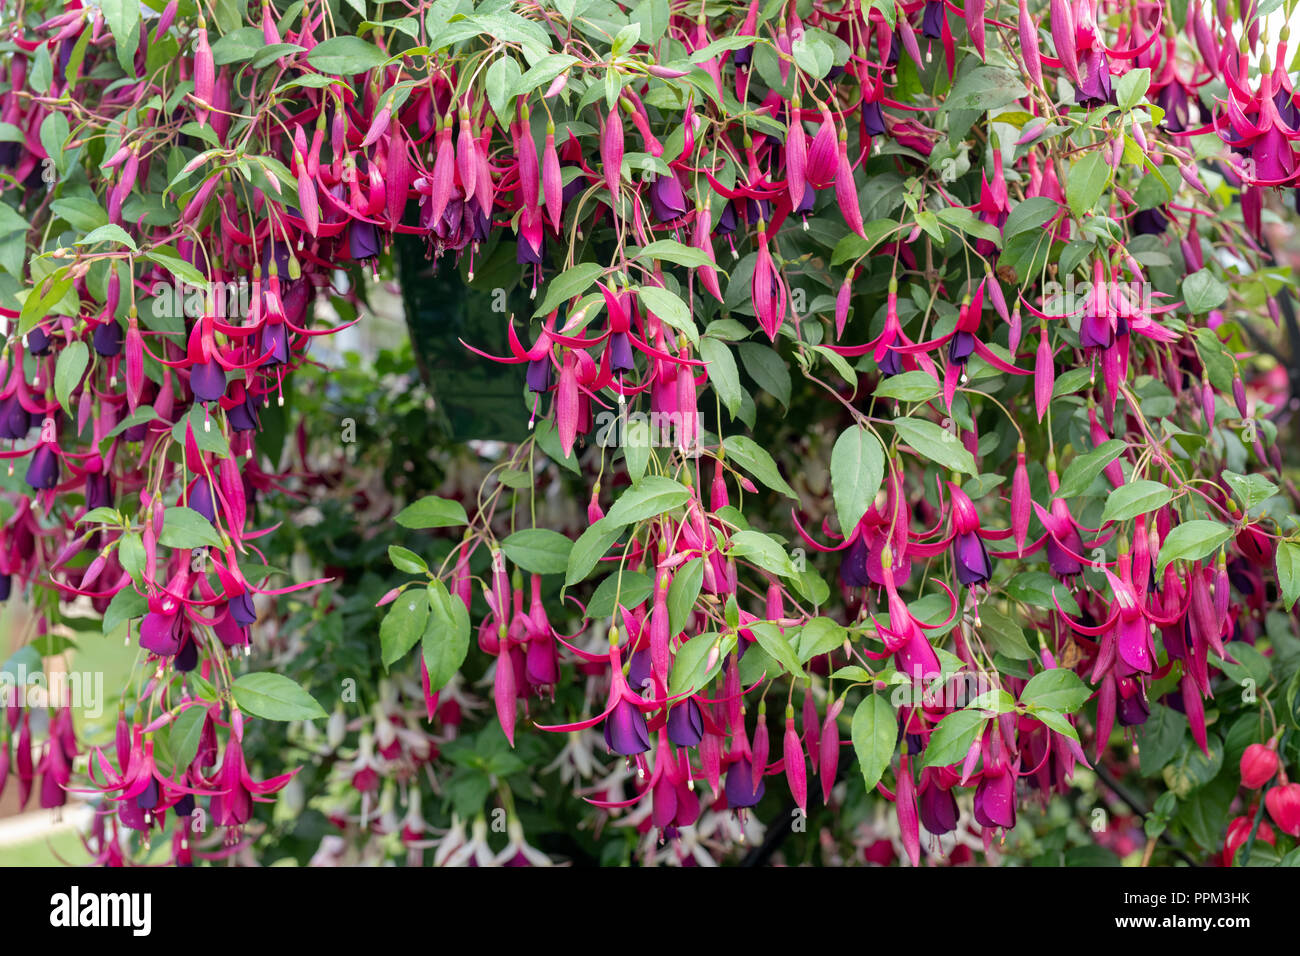 Fuchsia ‘Delicate purple’ flowers in a hanging basket Stock Photo